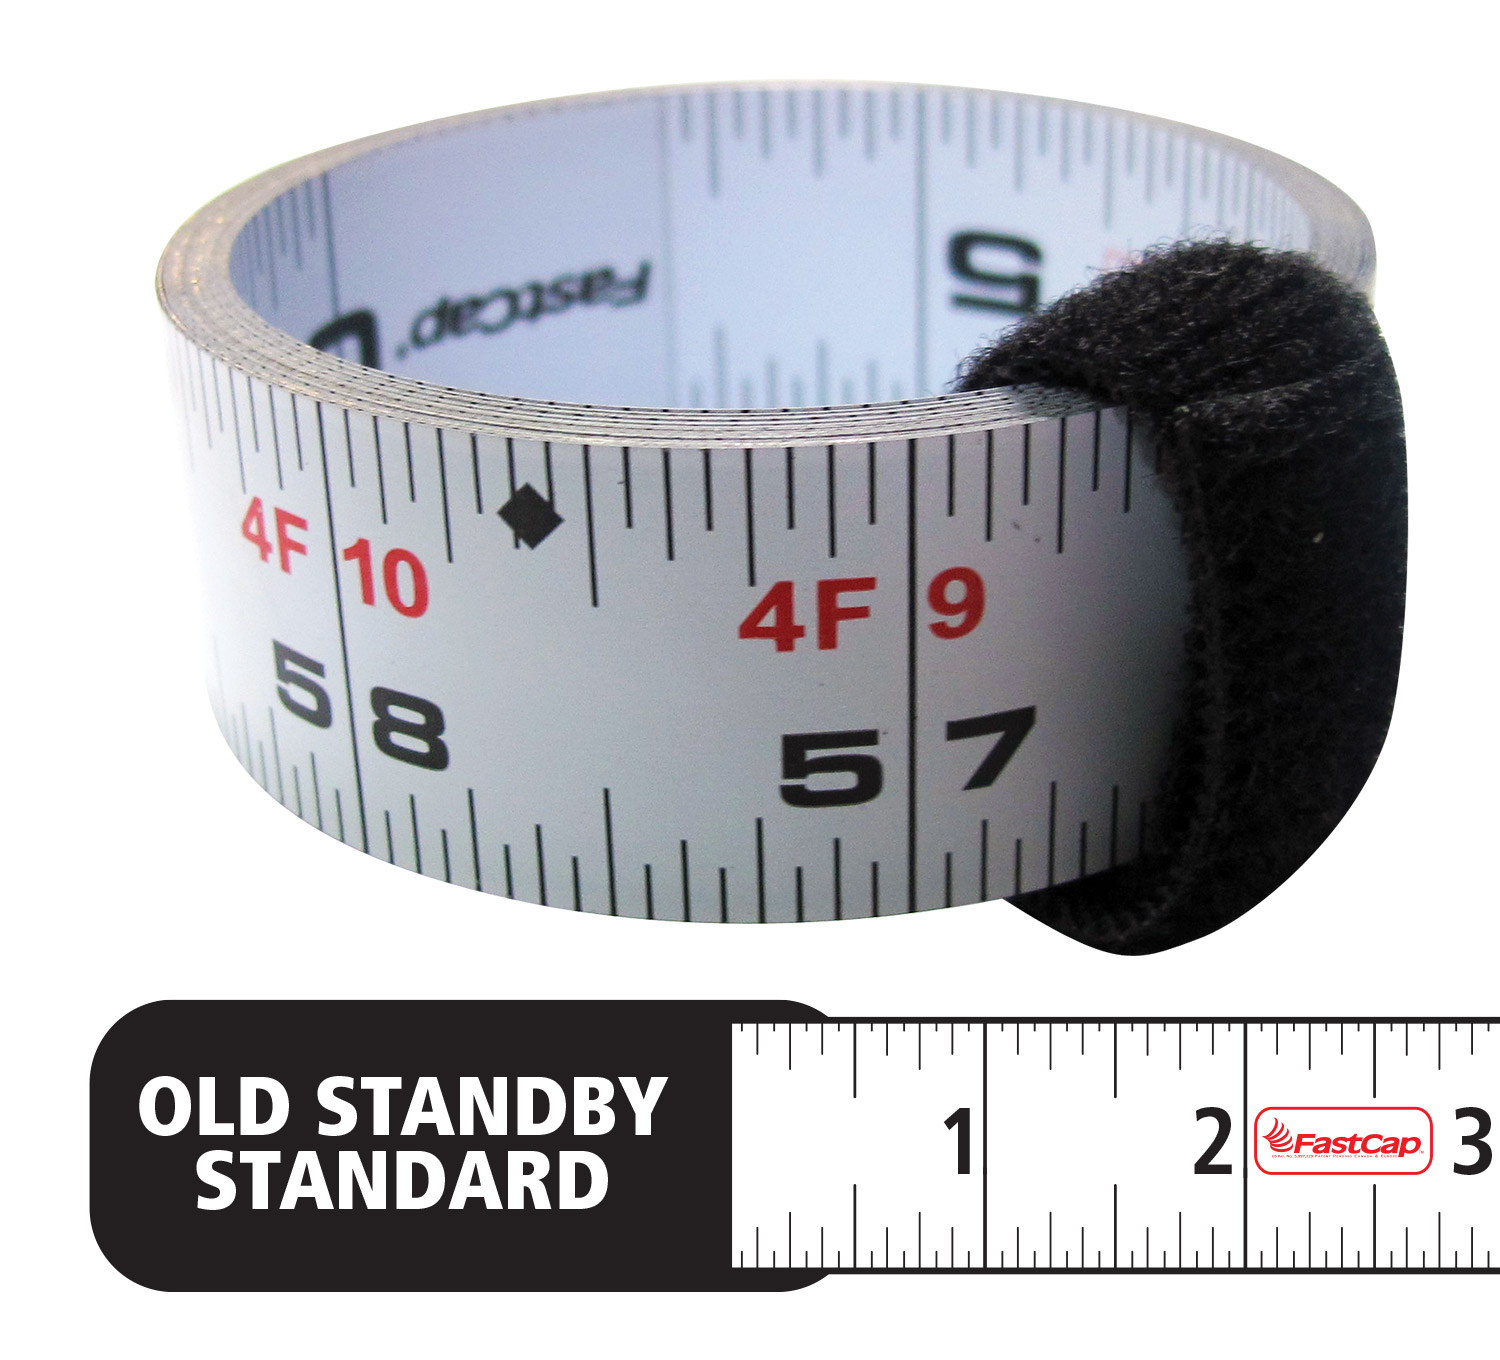 Fastcap PS-16 16-Feet Old Standby ProCarpenter Tape Measure